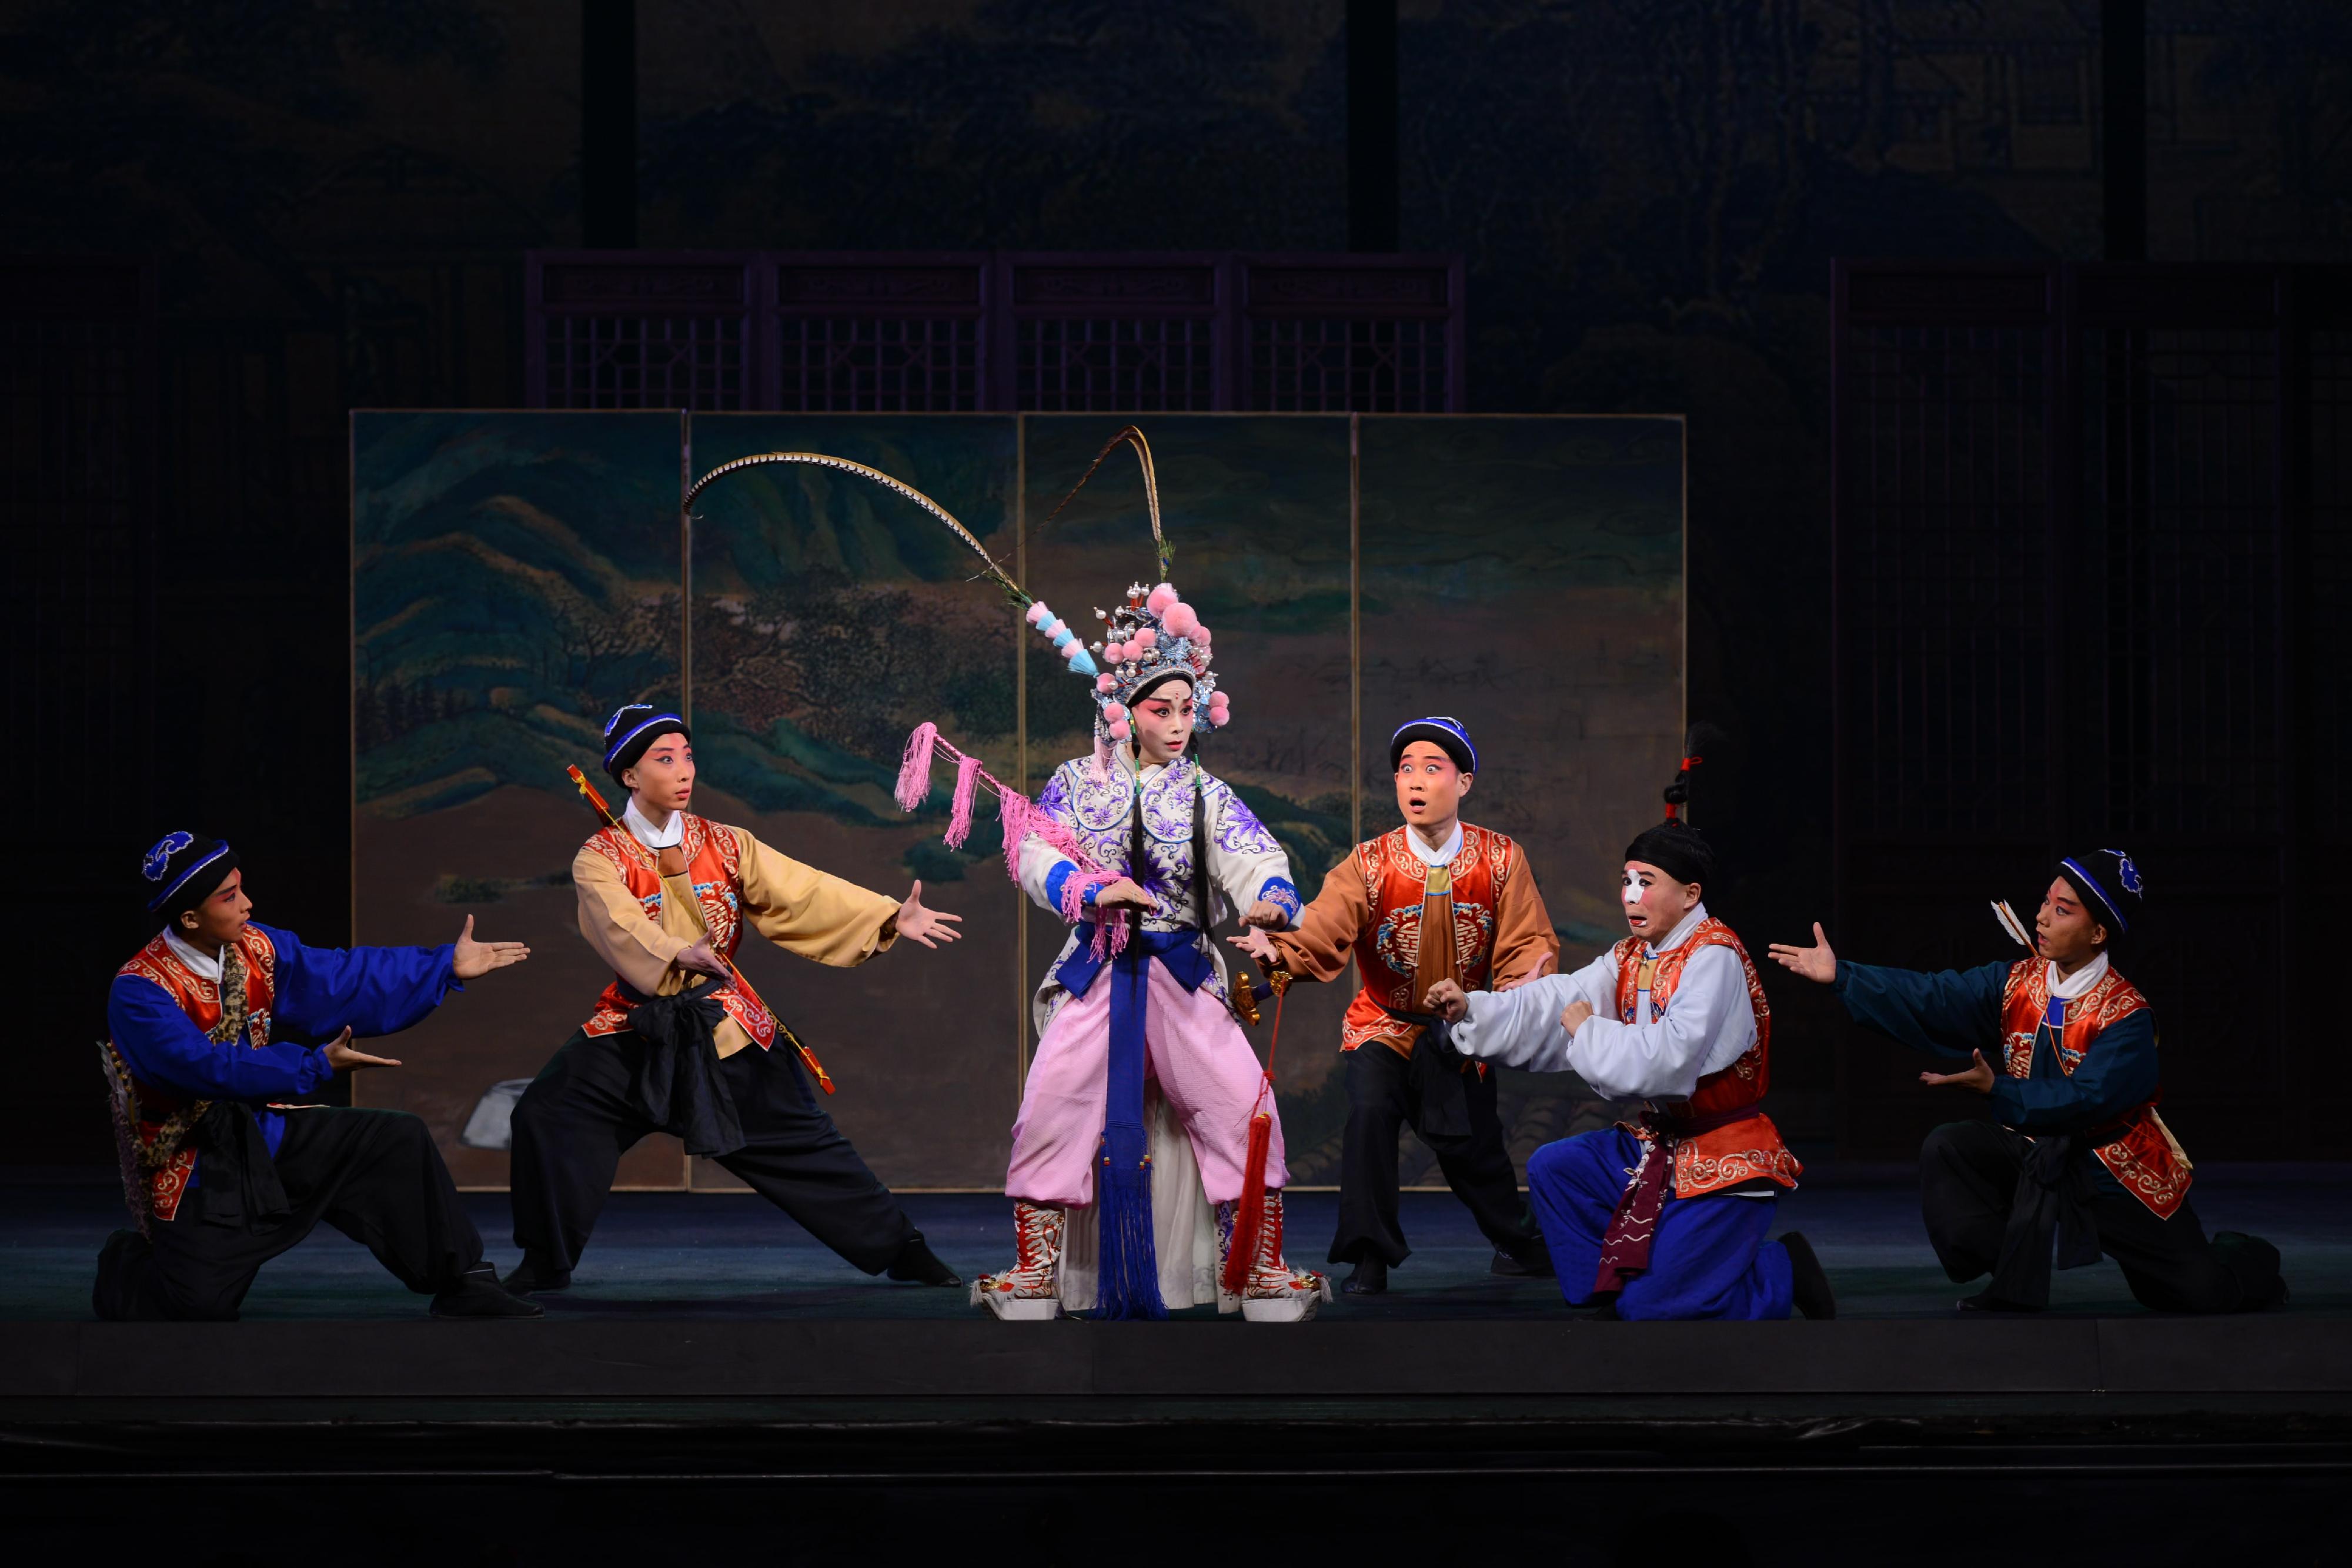 The inaugural Chinese Culture Festival will stage three classic Northern Kunqu opera plays in July. Photo shows a scene from the performance "The Hunt" from "The Story of the White Rabbit".